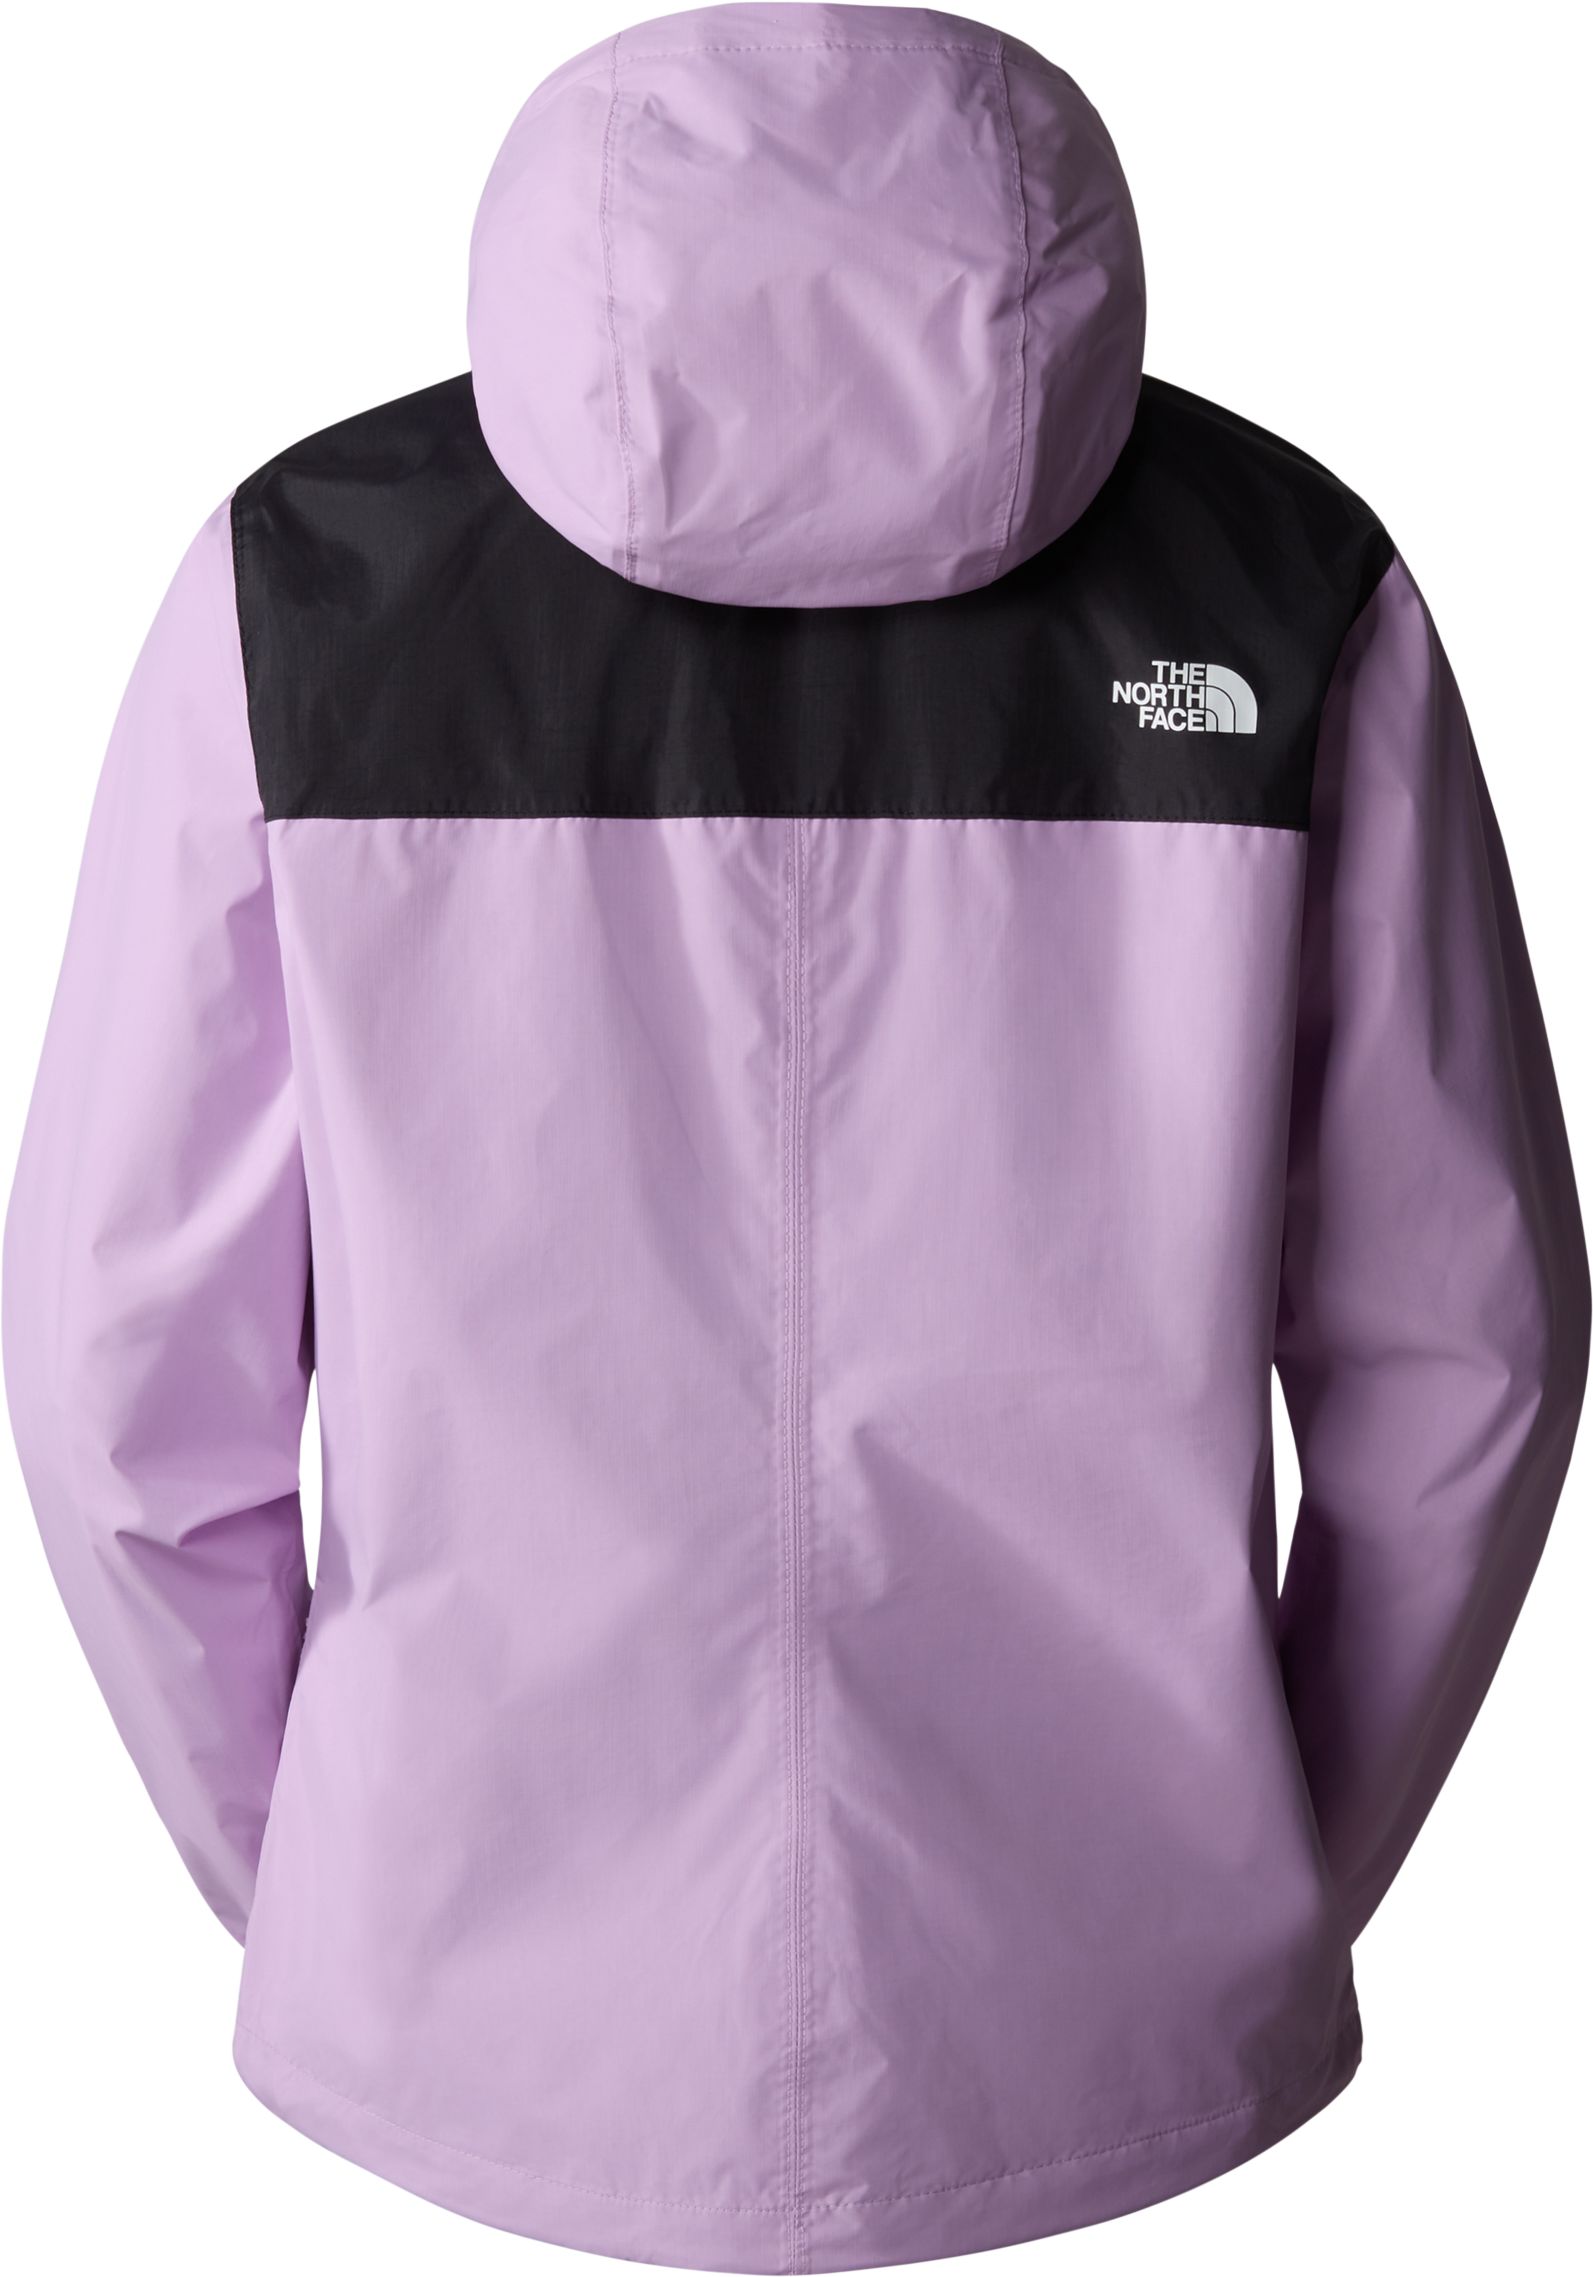 THE NORTH FACE, W ANTORA JACKET